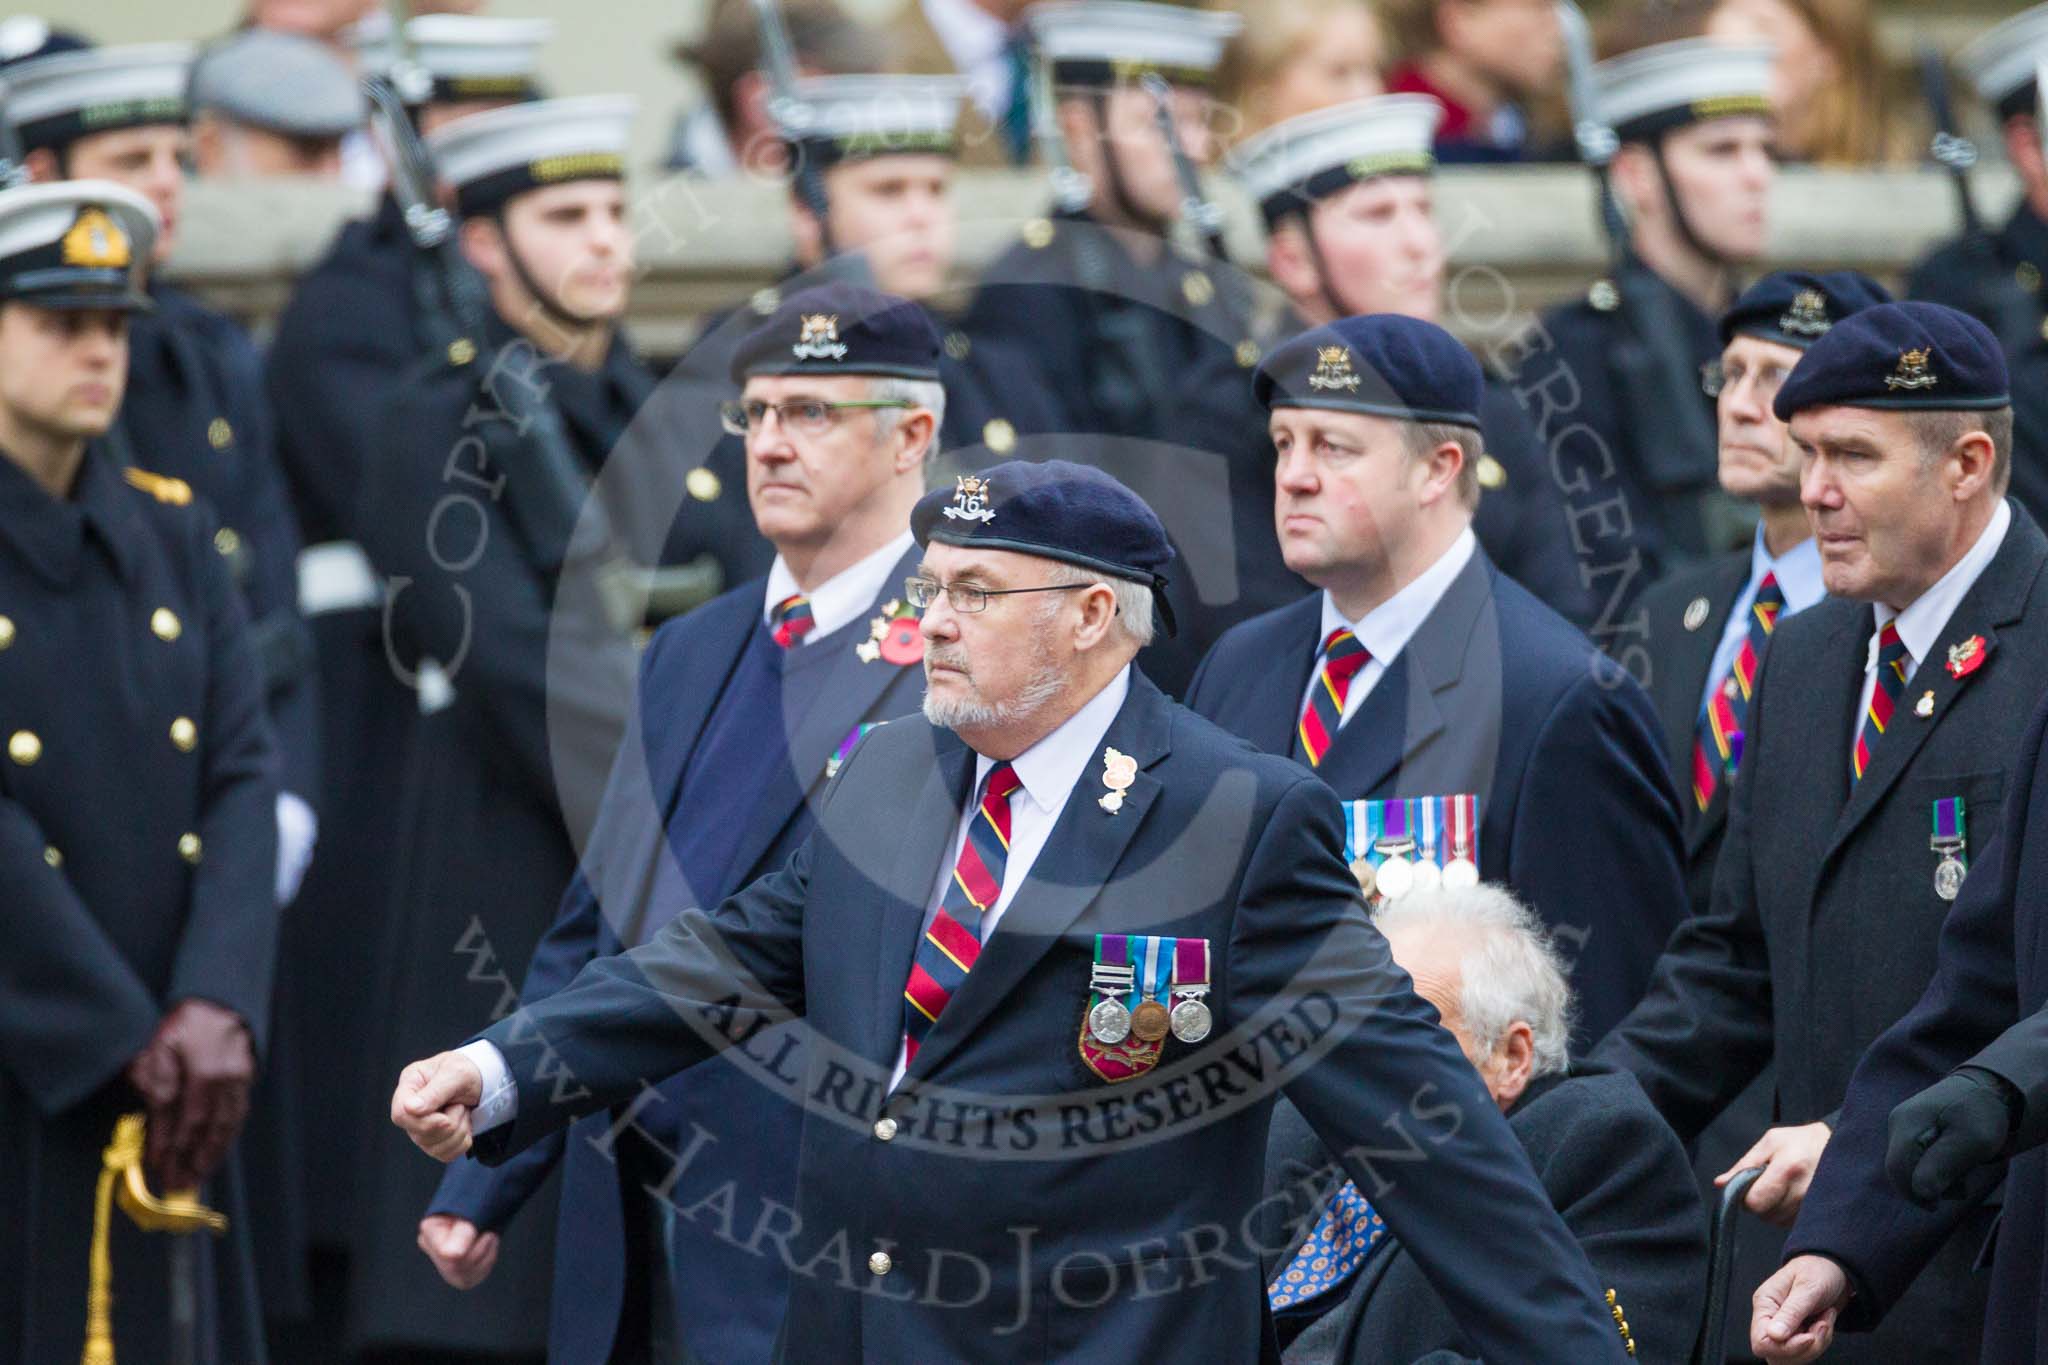 Remembrance Sunday at the Cenotaph 2015: Group B26, 16/5th Queen's Royal Lancers.
Cenotaph, Whitehall, London SW1,
London,
Greater London,
United Kingdom,
on 08 November 2015 at 11:41, image #205